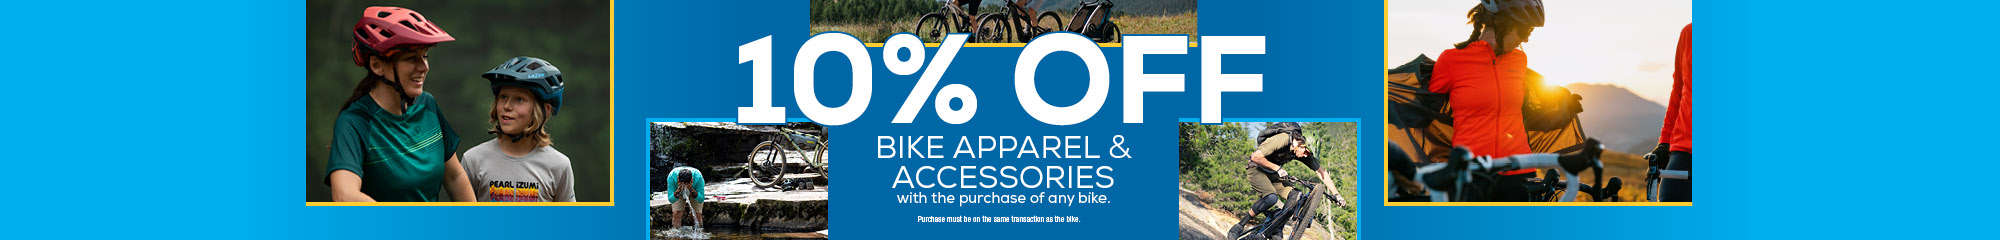 10% off cycling apparel and accessories with the purchase of any bike.  Excludes sale and clearance items.